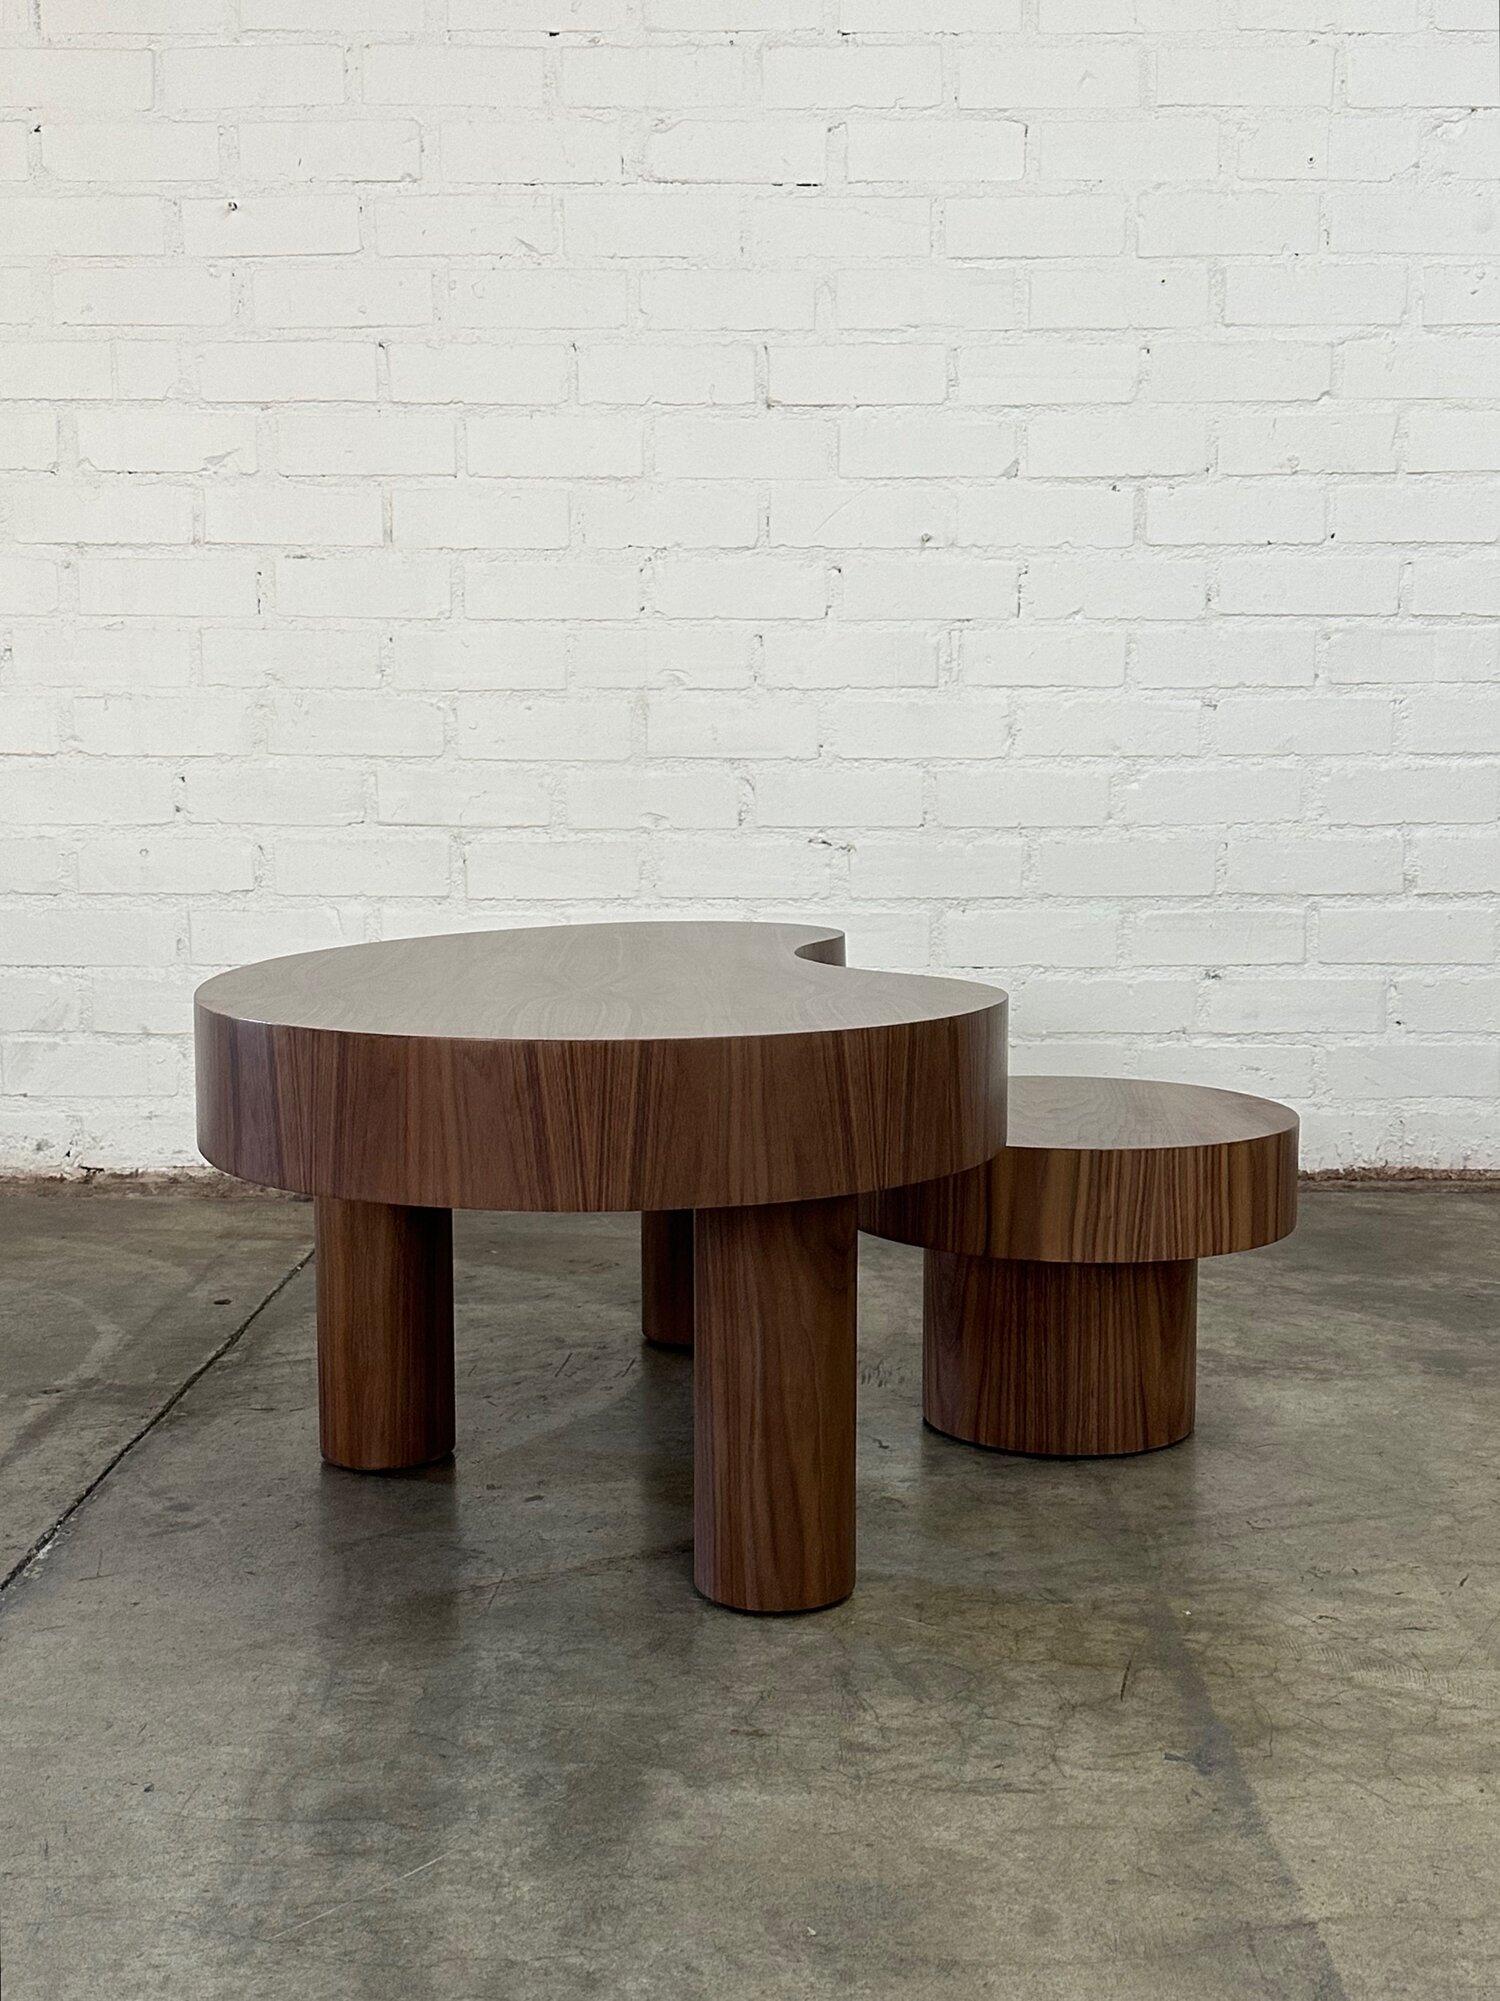 Small Kidney Two Tiered Coffee Table Set- Walnut In New Condition For Sale In Los Angeles, CA